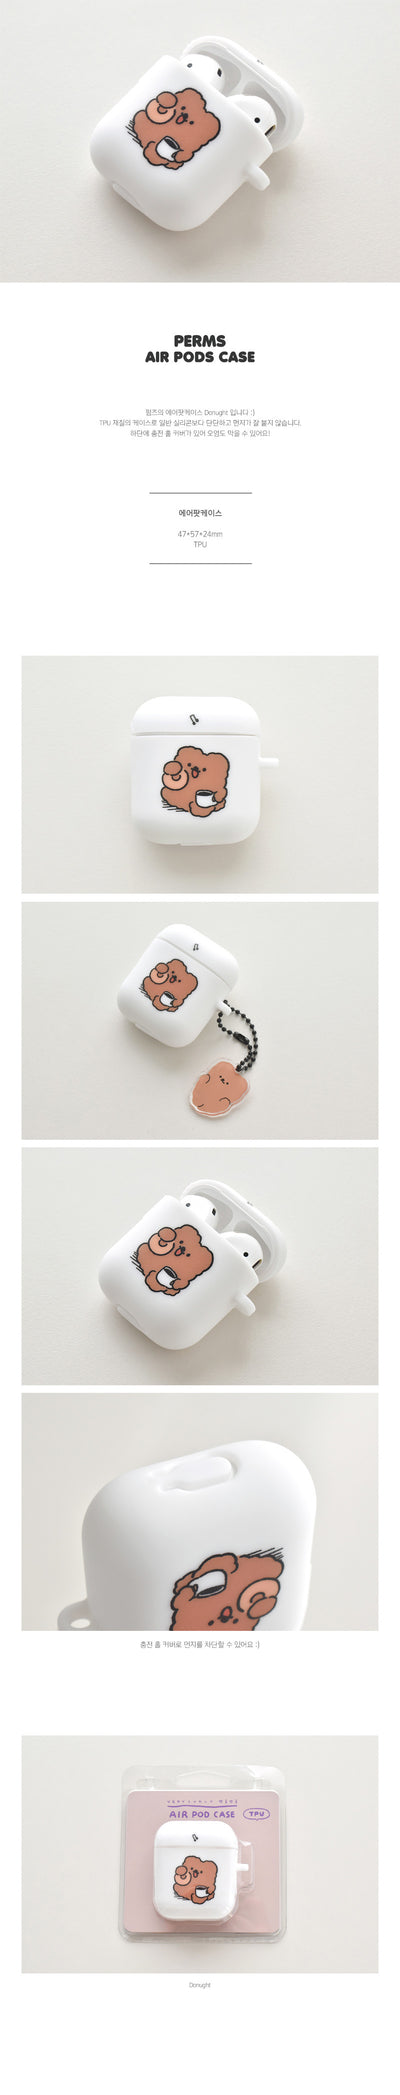 AirPods case_Donut